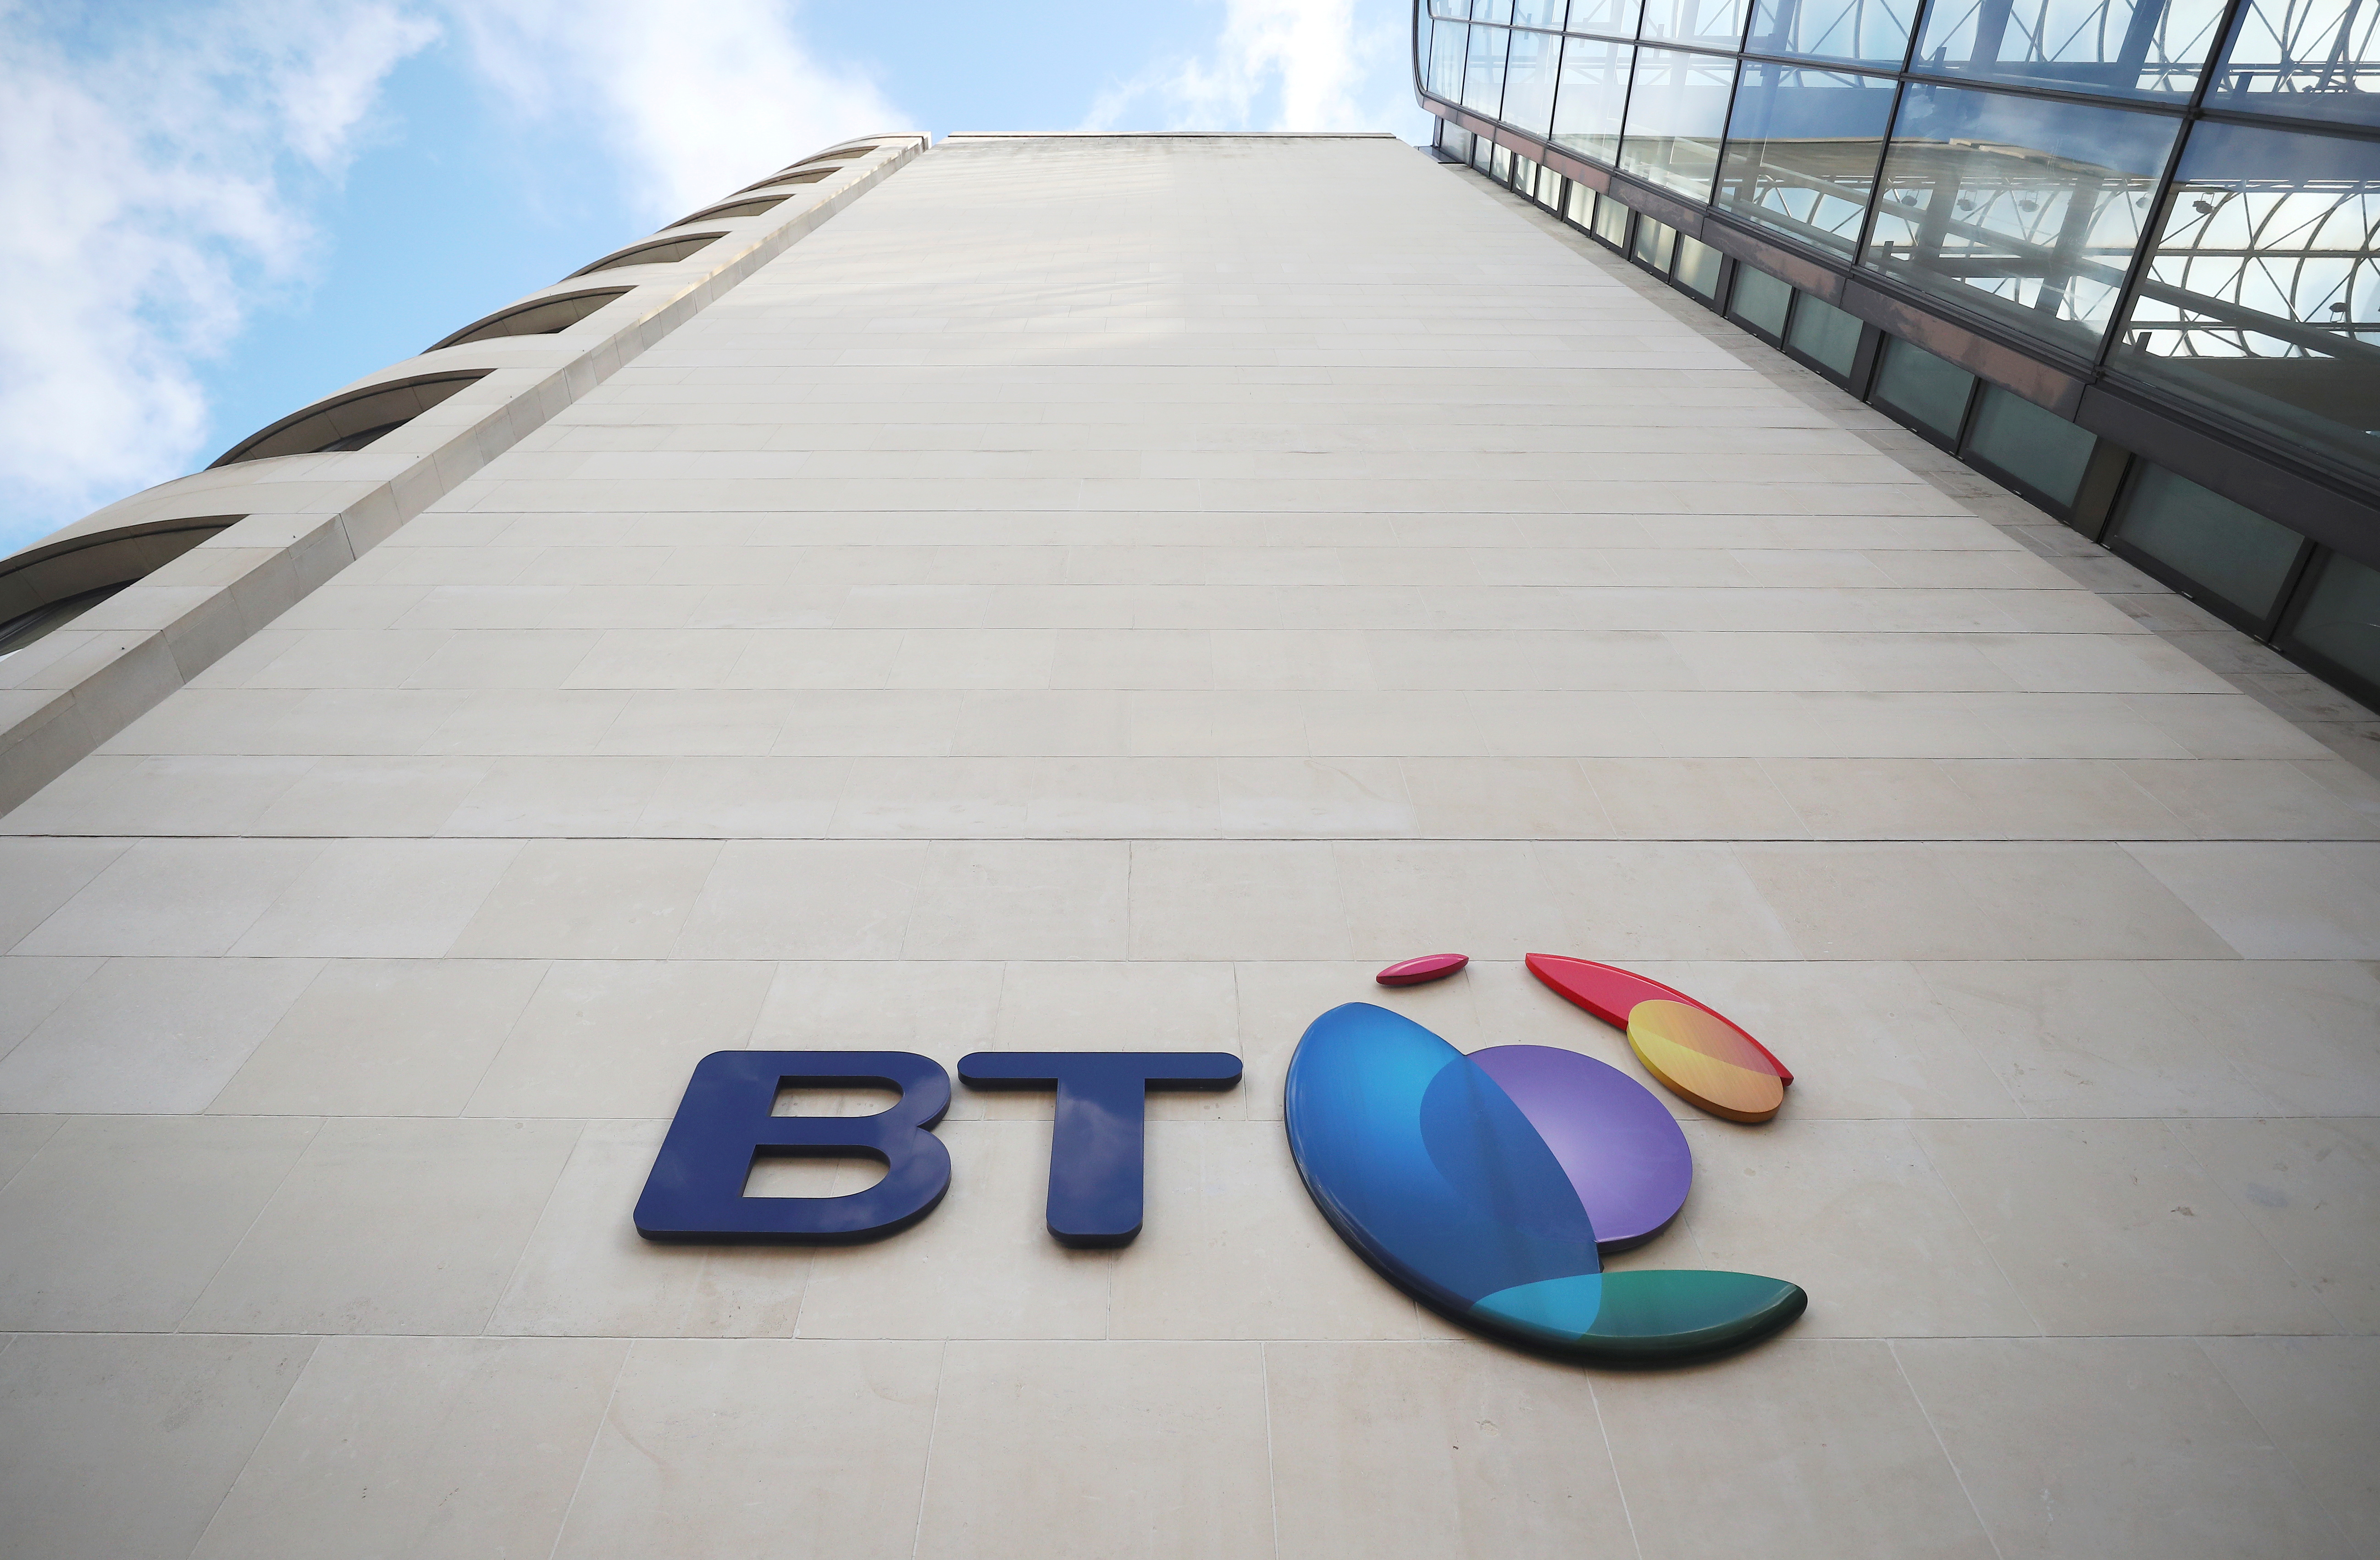 British Telecom (BT)'s headquarters is seen in central London, Britain May 10, 2018. REUTERS/Hannah McKay/File Photo